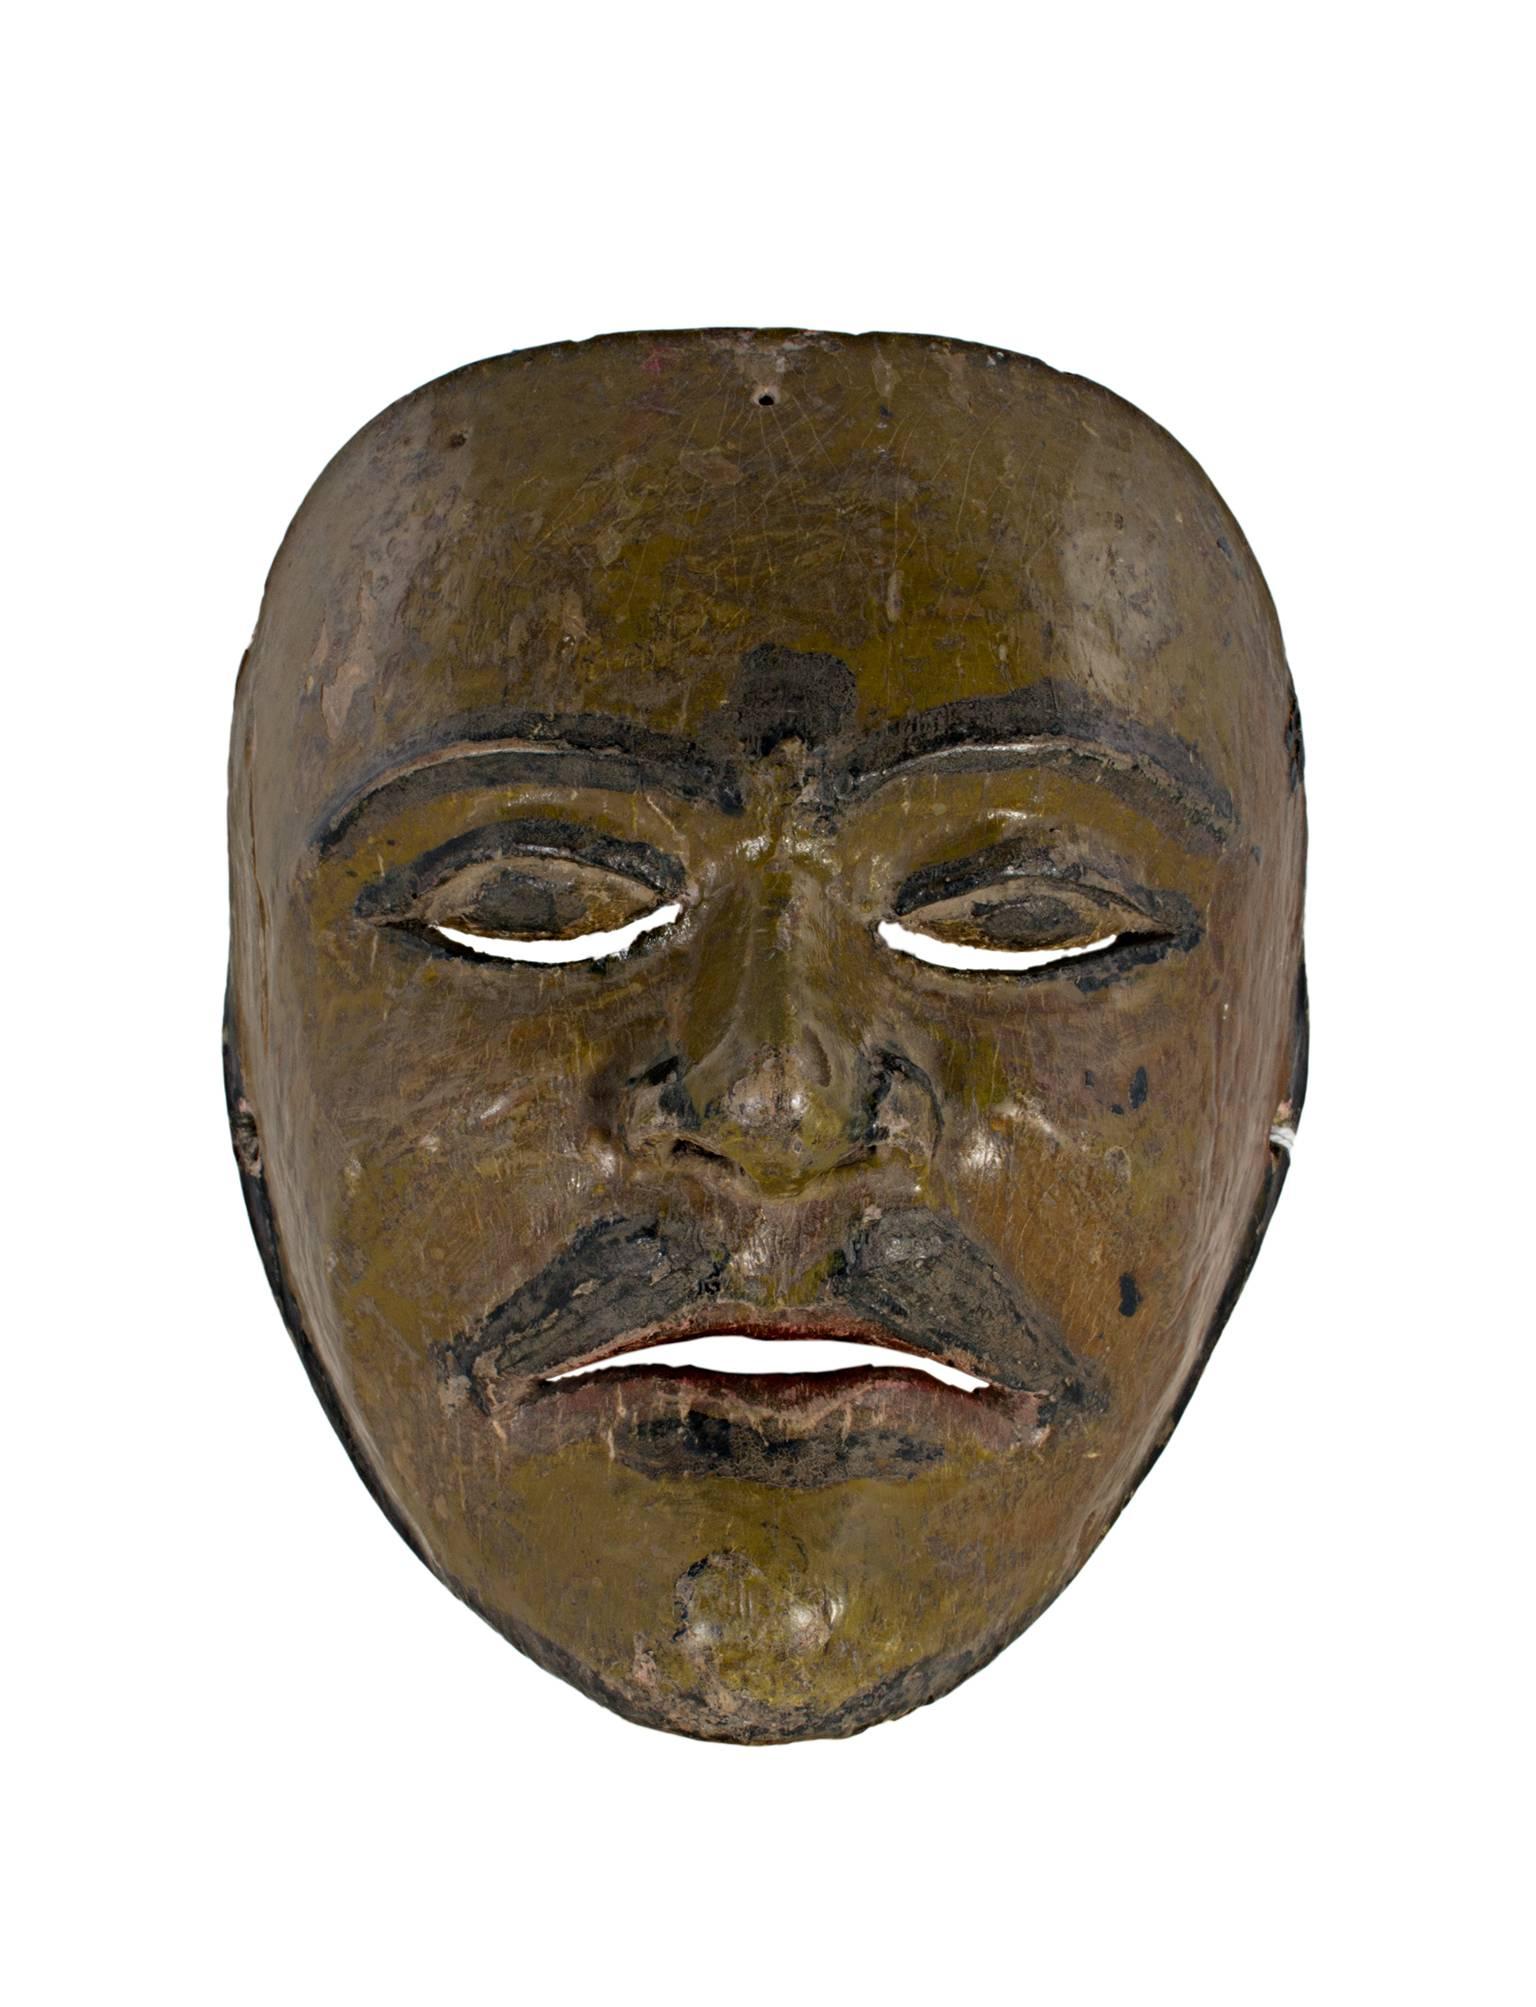 "Indonesian Mask of a Western Character, " Wood painted Mustard, Lime, & Green - Art by Unknown